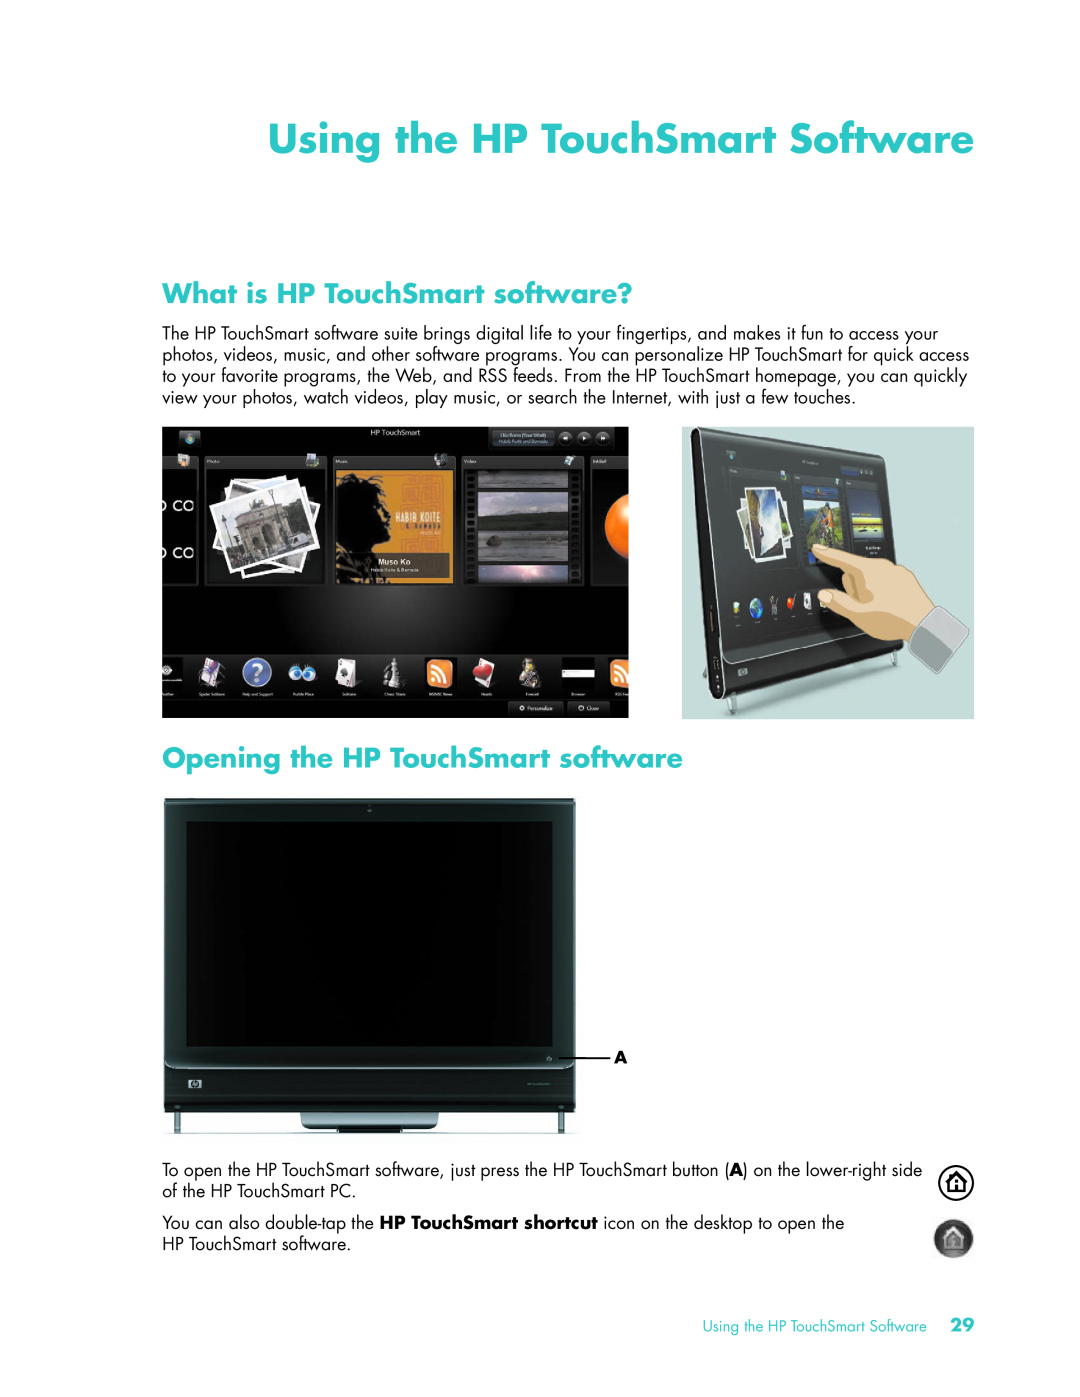 HP Debranded 22 Inch TSMT506, IQ504 KQ436AA-NOOS manual Using the HP TouchSmart Software, What is HP TouchSmart software? 